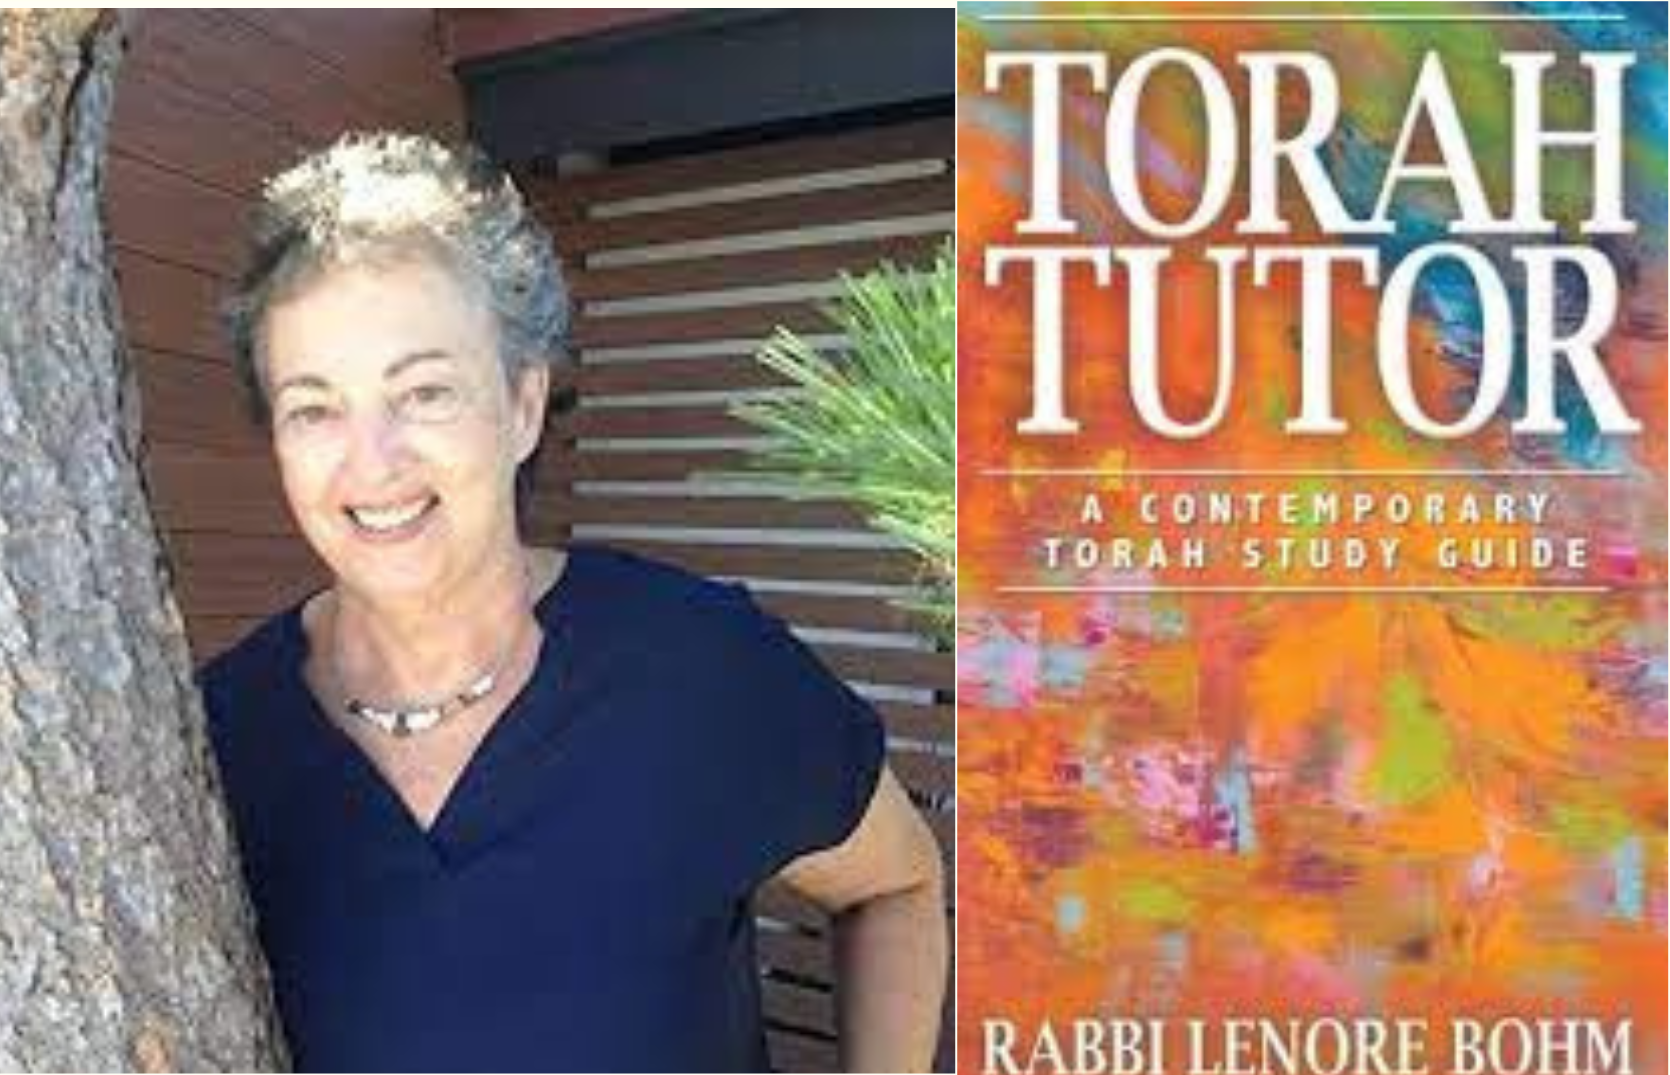 JBC Book & Author Event<br/>Torah Tutor: A Contemporary Torah Study Guide by Lenore Bohm<br/>Wed., Jan. 11 (7:30 pm) on Zoom